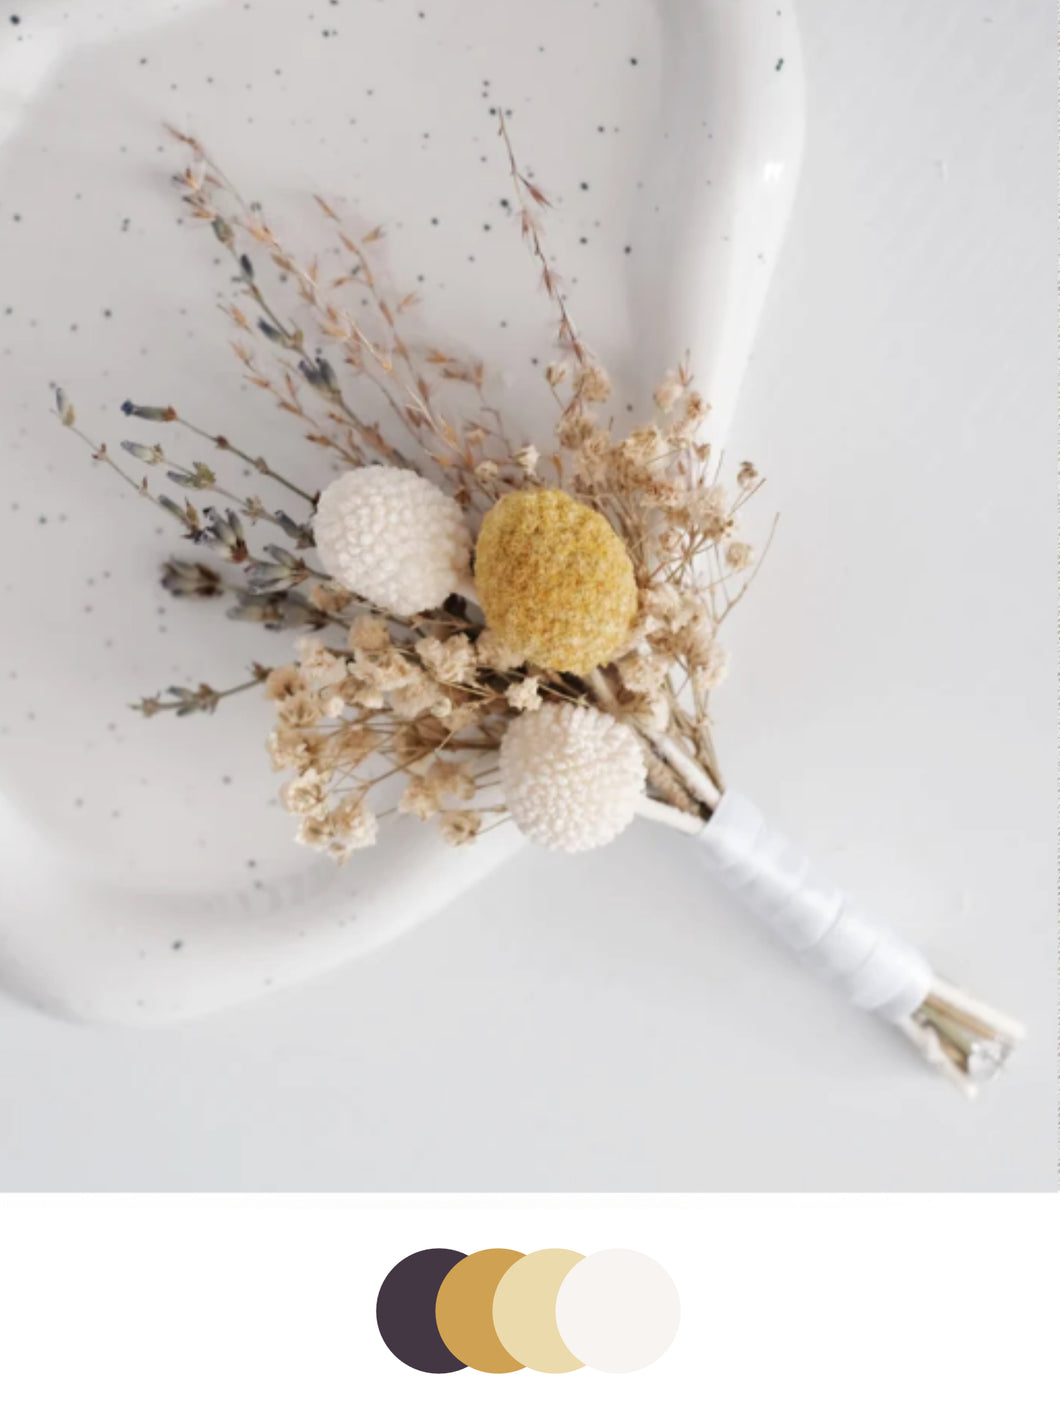 Groom's Luxe Boutonniere